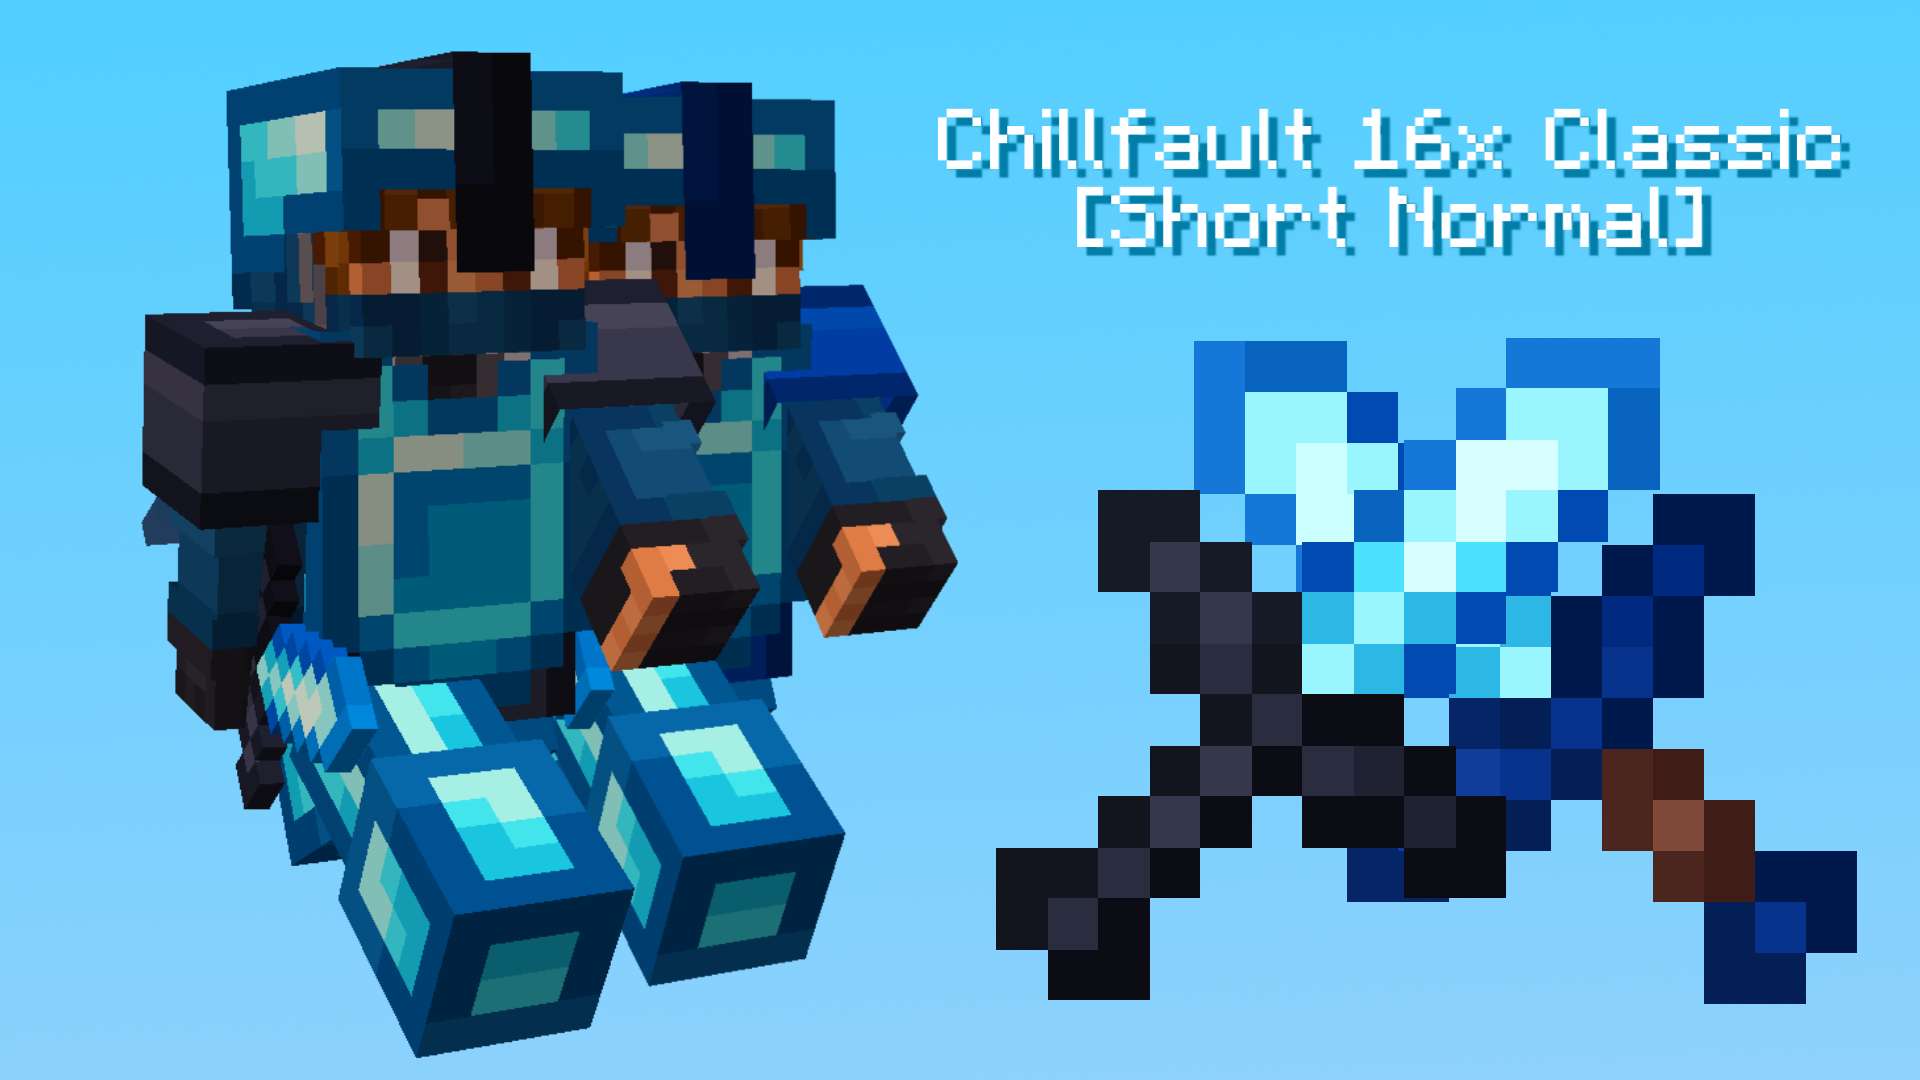 Chillfault 16x Classic [Short Normal] 16 by Jes13 on PvPRP